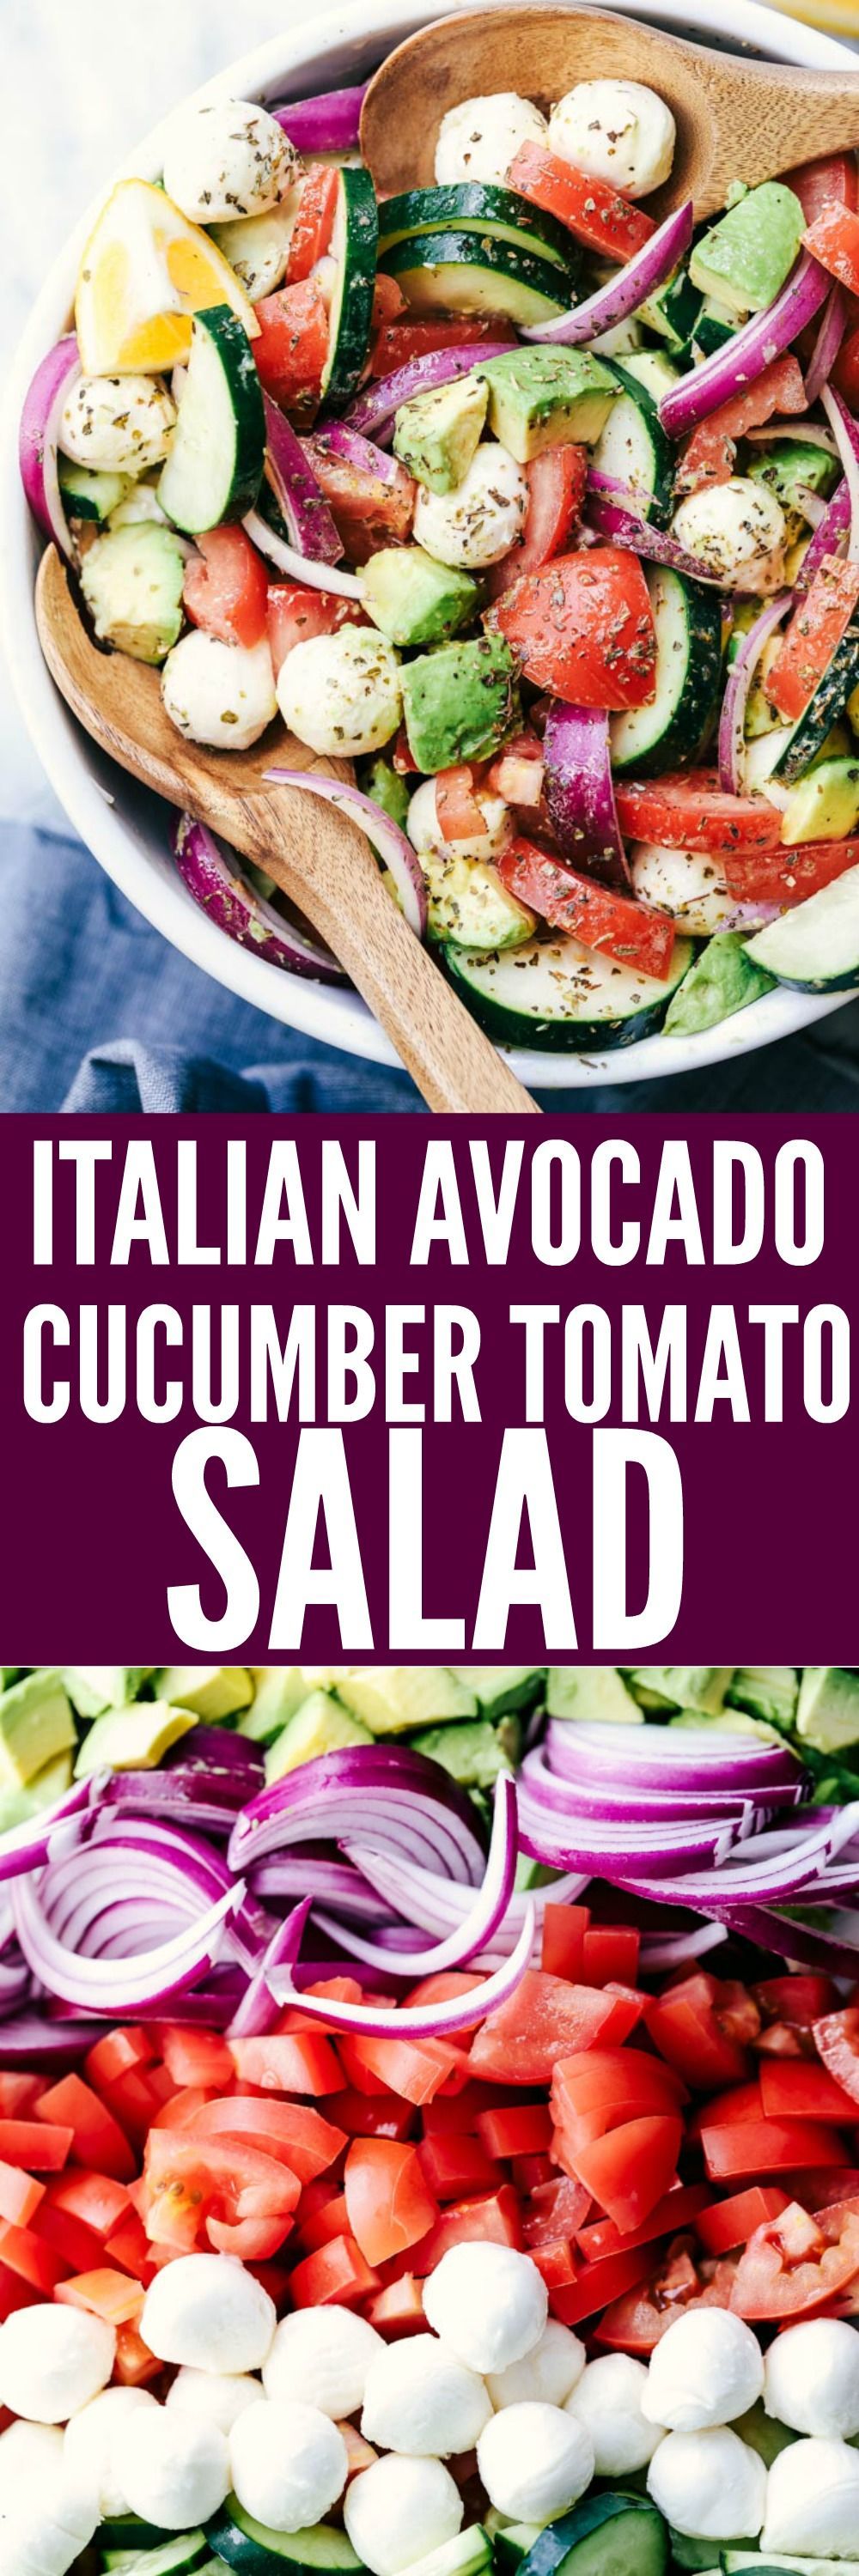 Italian Avocado Cucumber Tomato Salad is a fresh and delicious salad filled with avocado, tomato, red onion, cucumber and